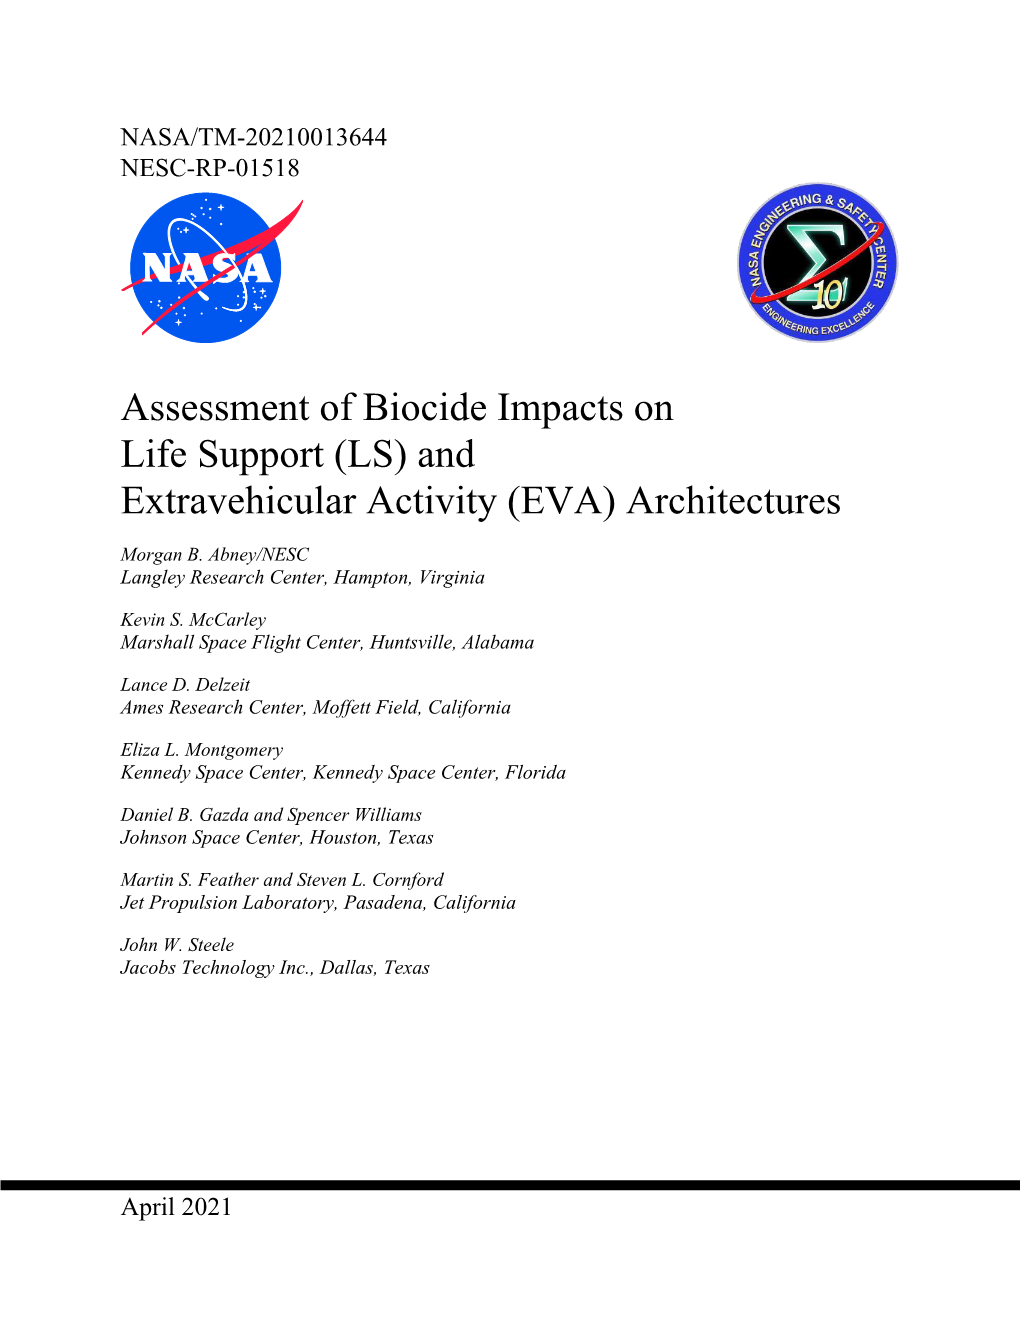 Assessment of Biocide Impacts on Life Support (LS) and Extravehicular Activity (EVA) Architectures